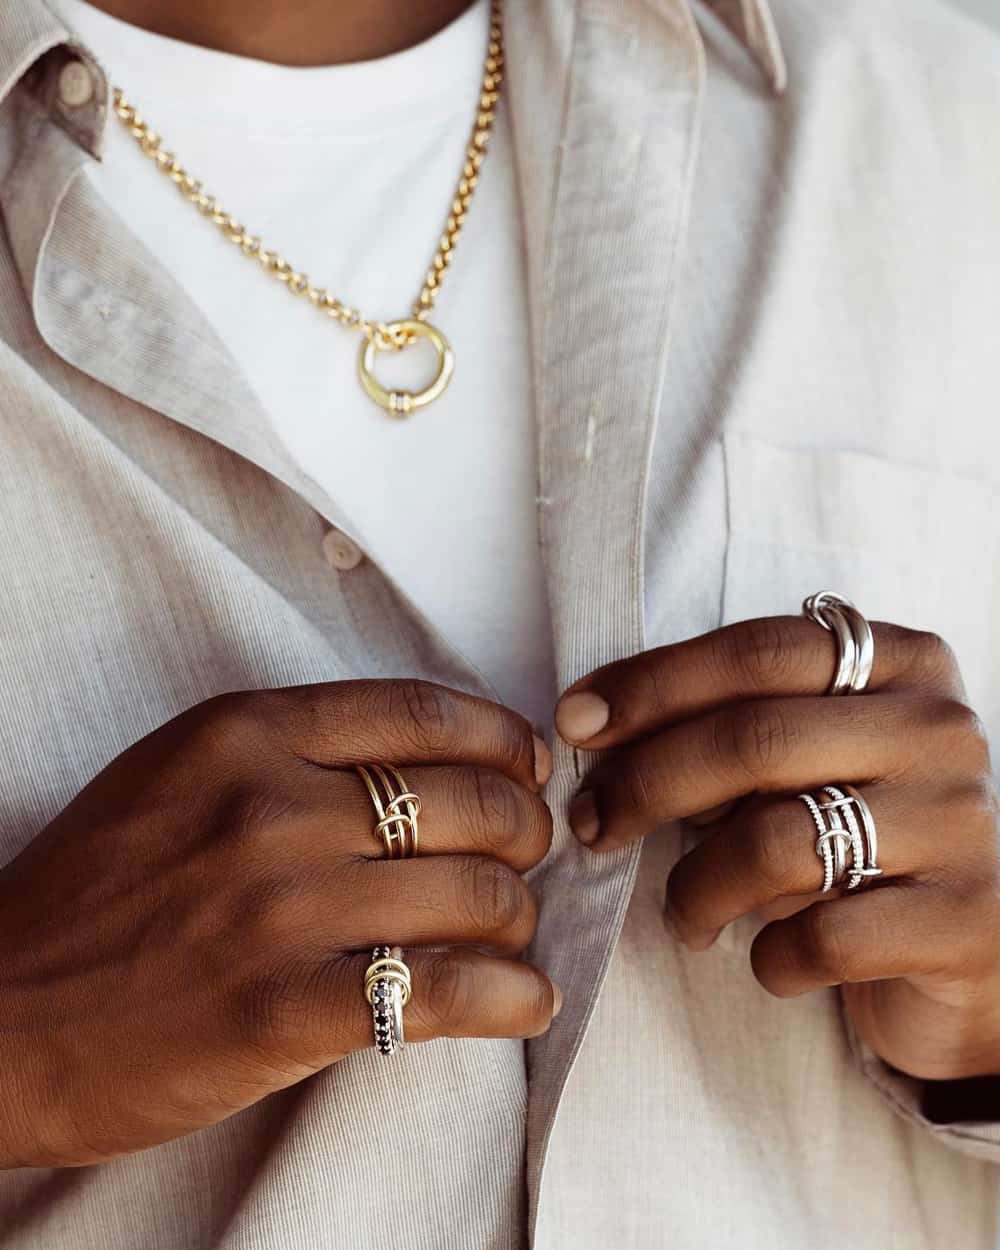 Close up of black man wearing a white T-shirt and grey shirt, with a Spinelli Kilcollin gold ring pendant necklace and multiple silver and gold rings